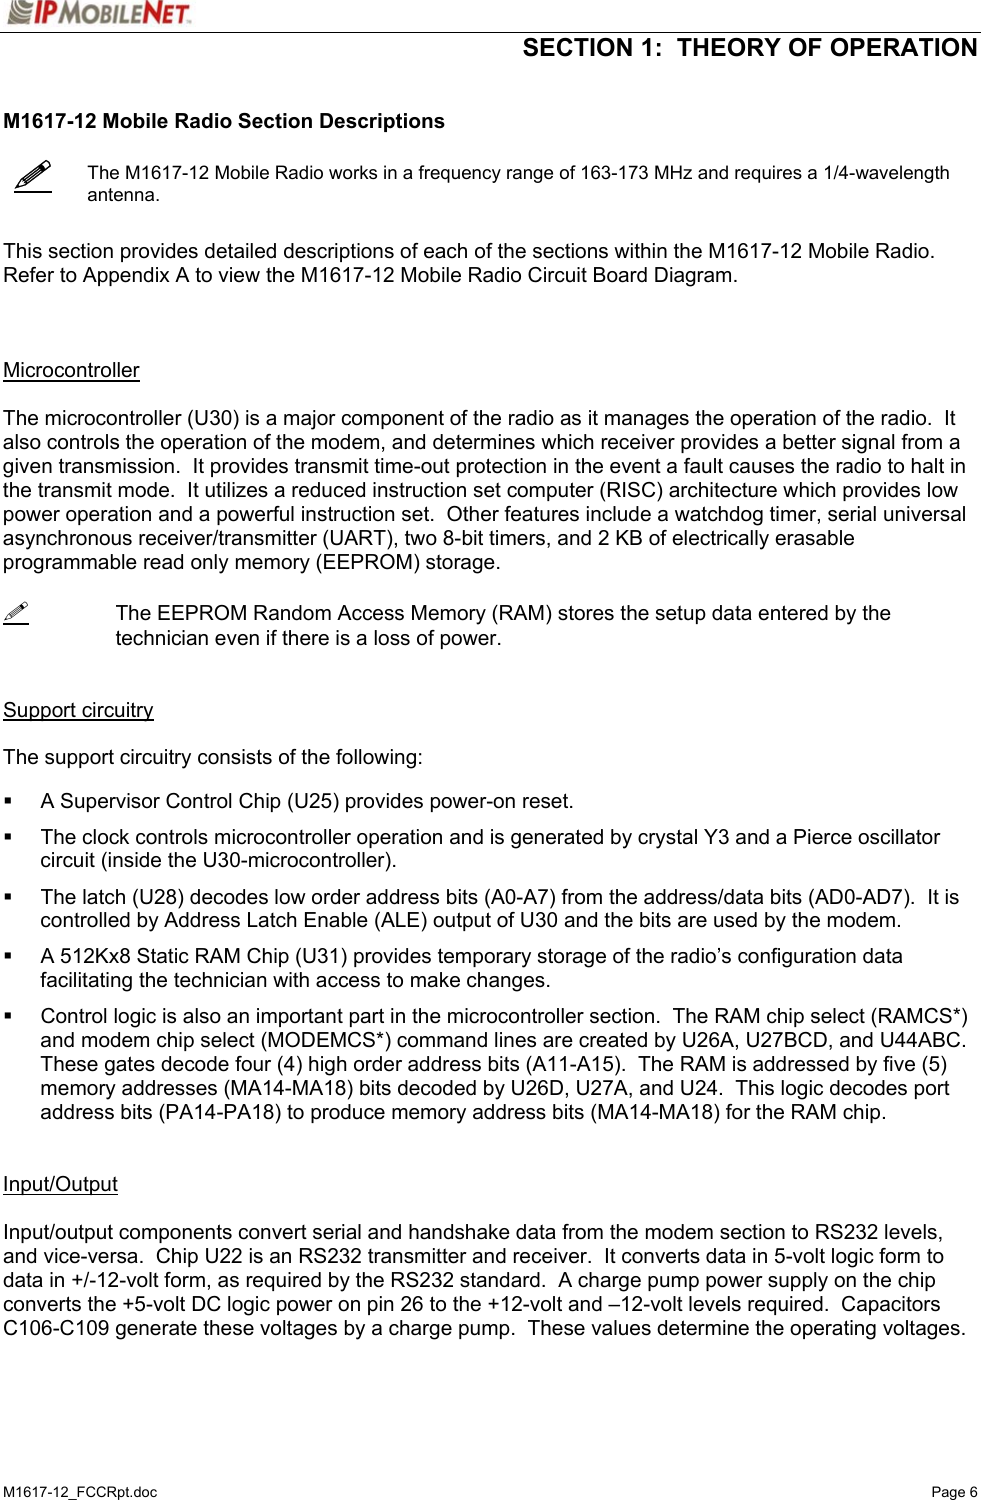  SECTION 1:  THEORY OF OPERATION  M1617-12_FCCRpt.doc   Page 6    M1617-12 Mobile Radio Section Descriptions     The M1617-12 Mobile Radio works in a frequency range of 163-173 MHz and requires a 1/4-wavelength antenna.   This section provides detailed descriptions of each of the sections within the M1617-12 Mobile Radio.  Refer to Appendix A to view the M1617-12 Mobile Radio Circuit Board Diagram.    Microcontroller  The microcontroller (U30) is a major component of the radio as it manages the operation of the radio.  It also controls the operation of the modem, and determines which receiver provides a better signal from a given transmission.  It provides transmit time-out protection in the event a fault causes the radio to halt in the transmit mode.  It utilizes a reduced instruction set computer (RISC) architecture which provides low power operation and a powerful instruction set.  Other features include a watchdog timer, serial universal asynchronous receiver/transmitter (UART), two 8-bit timers, and 2 KB of electrically erasable programmable read only memory (EEPROM) storage.    The EEPROM Random Access Memory (RAM) stores the setup data entered by the technician even if there is a loss of power.   Support circuitry  The support circuitry consists of the following:      A Supervisor Control Chip (U25) provides power-on reset.    The clock controls microcontroller operation and is generated by crystal Y3 and a Pierce oscillator circuit (inside the U30-microcontroller).    The latch (U28) decodes low order address bits (A0-A7) from the address/data bits (AD0-AD7).  It is controlled by Address Latch Enable (ALE) output of U30 and the bits are used by the modem.    A 512Kx8 Static RAM Chip (U31) provides temporary storage of the radio’s configuration data facilitating the technician with access to make changes.    Control logic is also an important part in the microcontroller section.  The RAM chip select (RAMCS*) and modem chip select (MODEMCS*) command lines are created by U26A, U27BCD, and U44ABC.  These gates decode four (4) high order address bits (A11-A15).  The RAM is addressed by five (5) memory addresses (MA14-MA18) bits decoded by U26D, U27A, and U24.  This logic decodes port address bits (PA14-PA18) to produce memory address bits (MA14-MA18) for the RAM chip.   Input/Output   Input/output components convert serial and handshake data from the modem section to RS232 levels, and vice-versa.  Chip U22 is an RS232 transmitter and receiver.  It converts data in 5-volt logic form to data in +/-12-volt form, as required by the RS232 standard.  A charge pump power supply on the chip converts the +5-volt DC logic power on pin 26 to the +12-volt and –12-volt levels required.  Capacitors C106-C109 generate these voltages by a charge pump.  These values determine the operating voltages.  